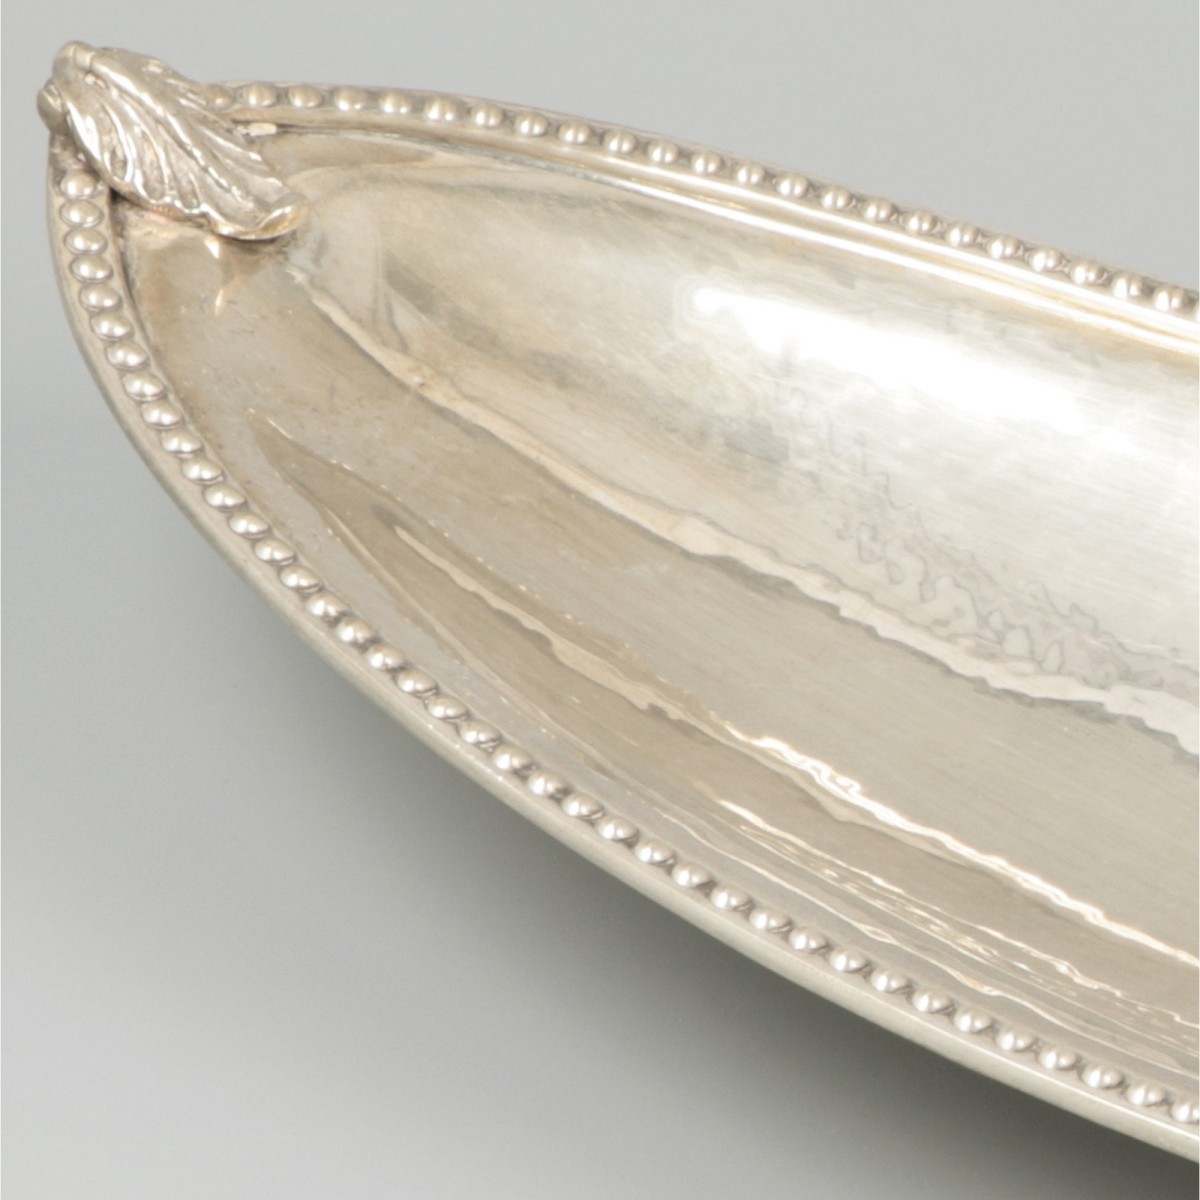 Delicacy bowl silver. - Image 3 of 5